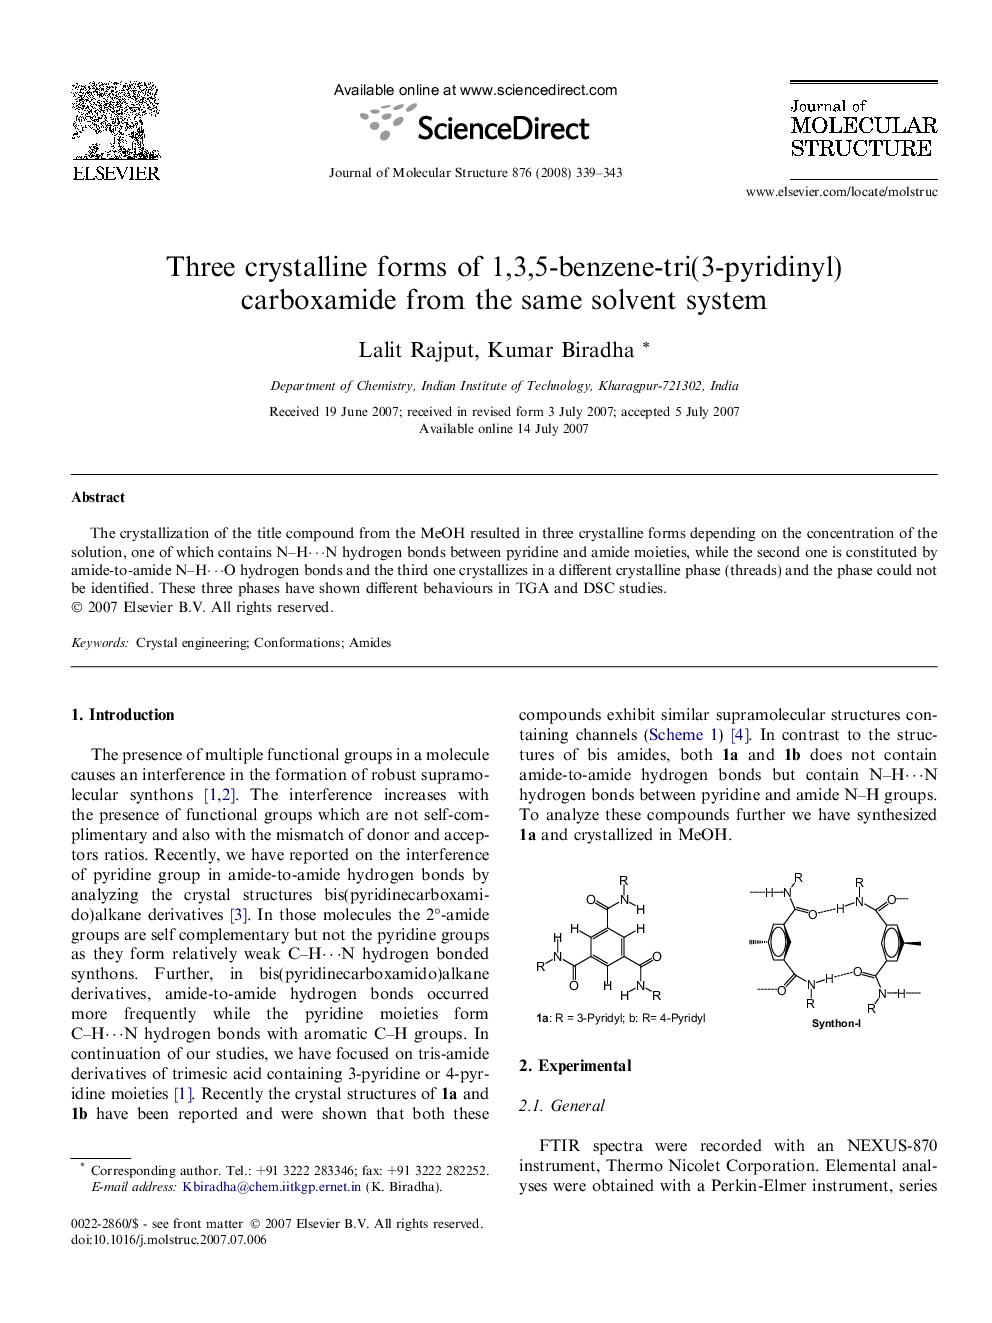 Three crystalline forms of 1,3,5-benzene-tri(3-pyridinyl)carboxamide from the same solvent system